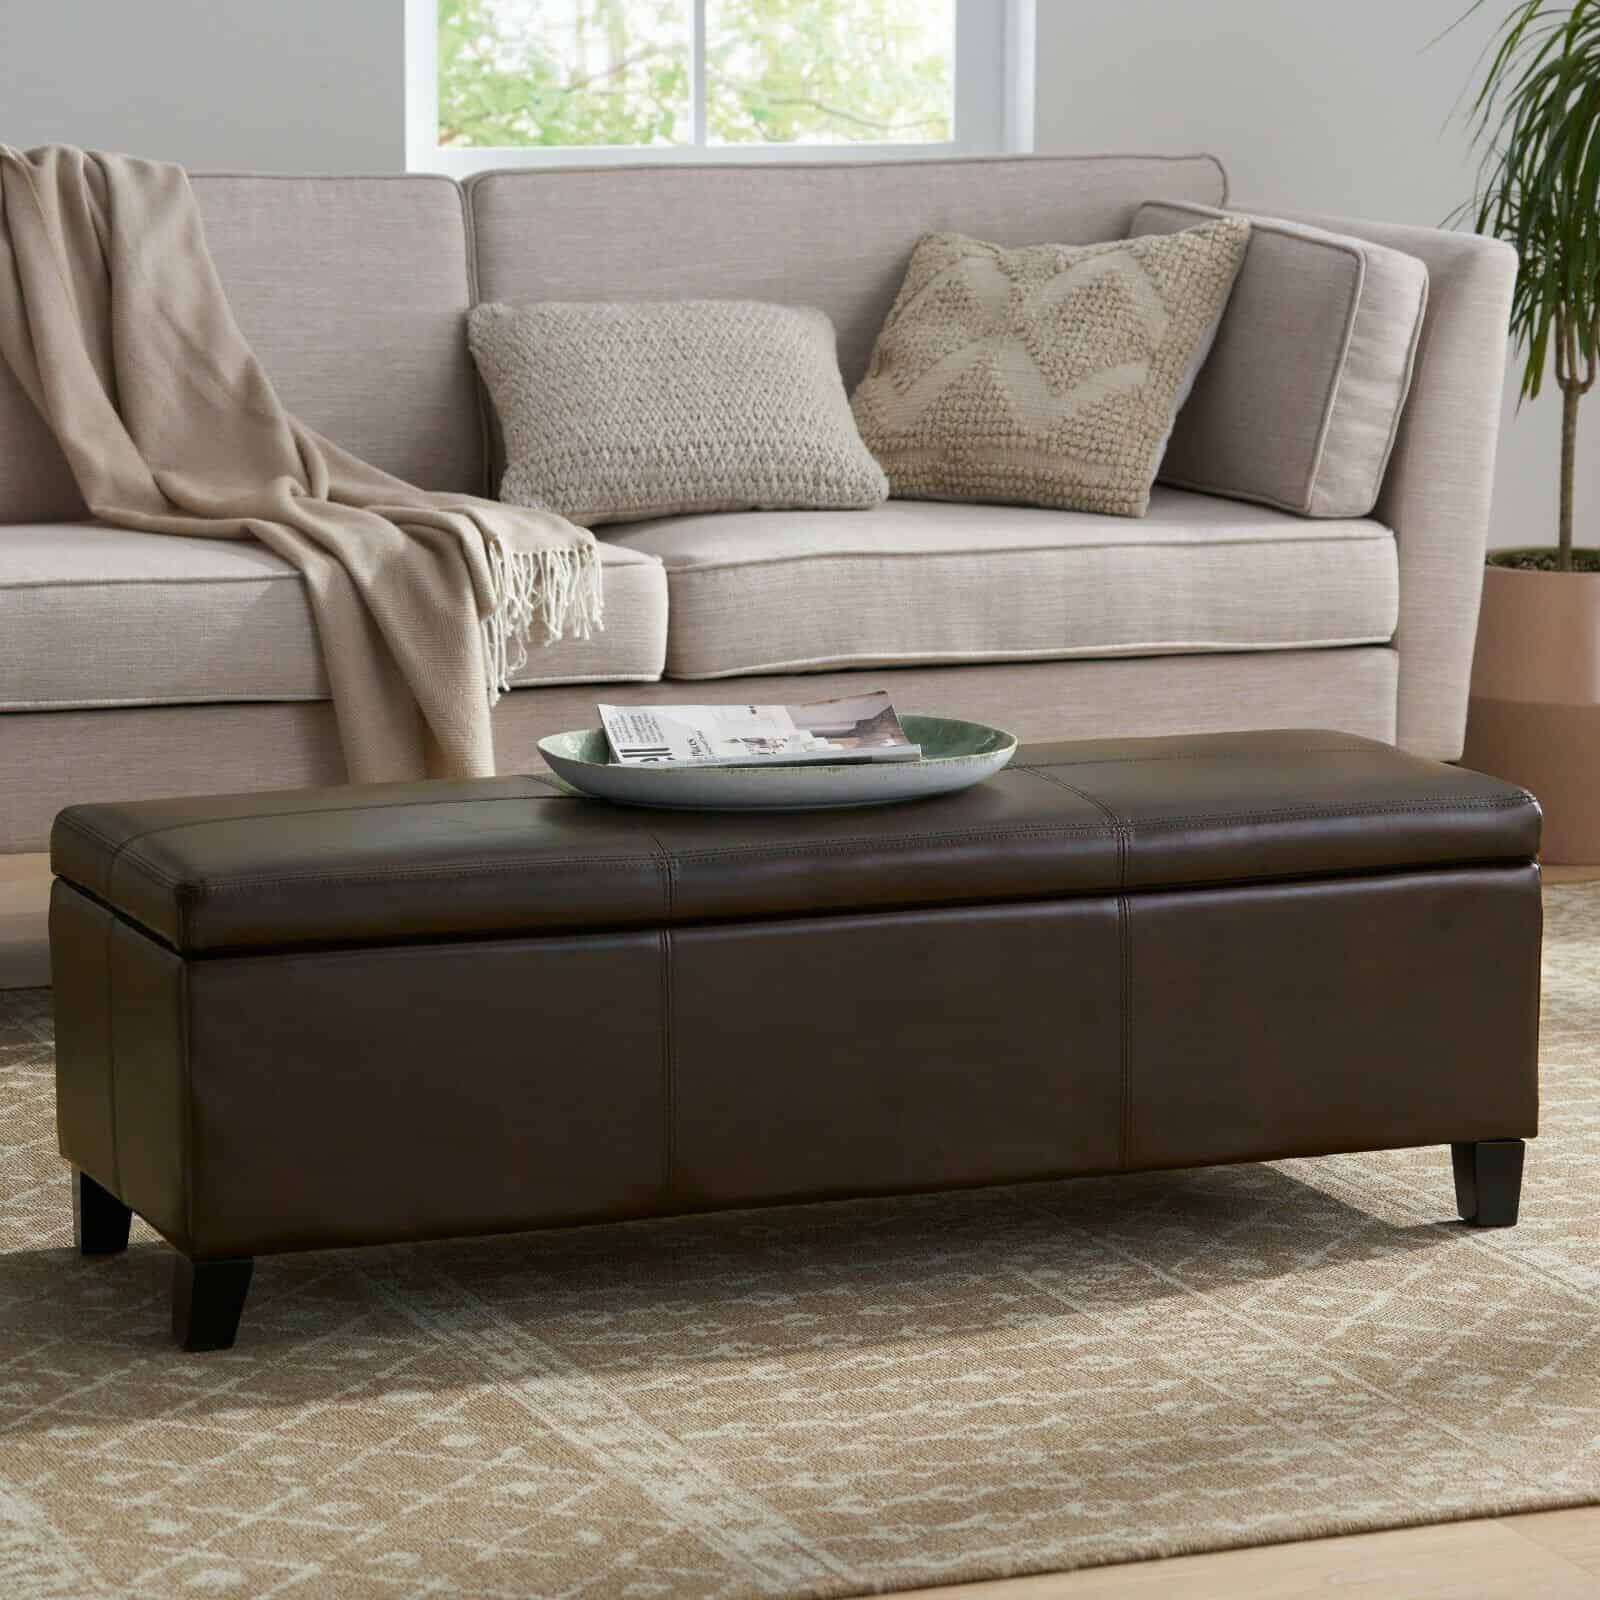 A brown leather storage ottoman in a living room.